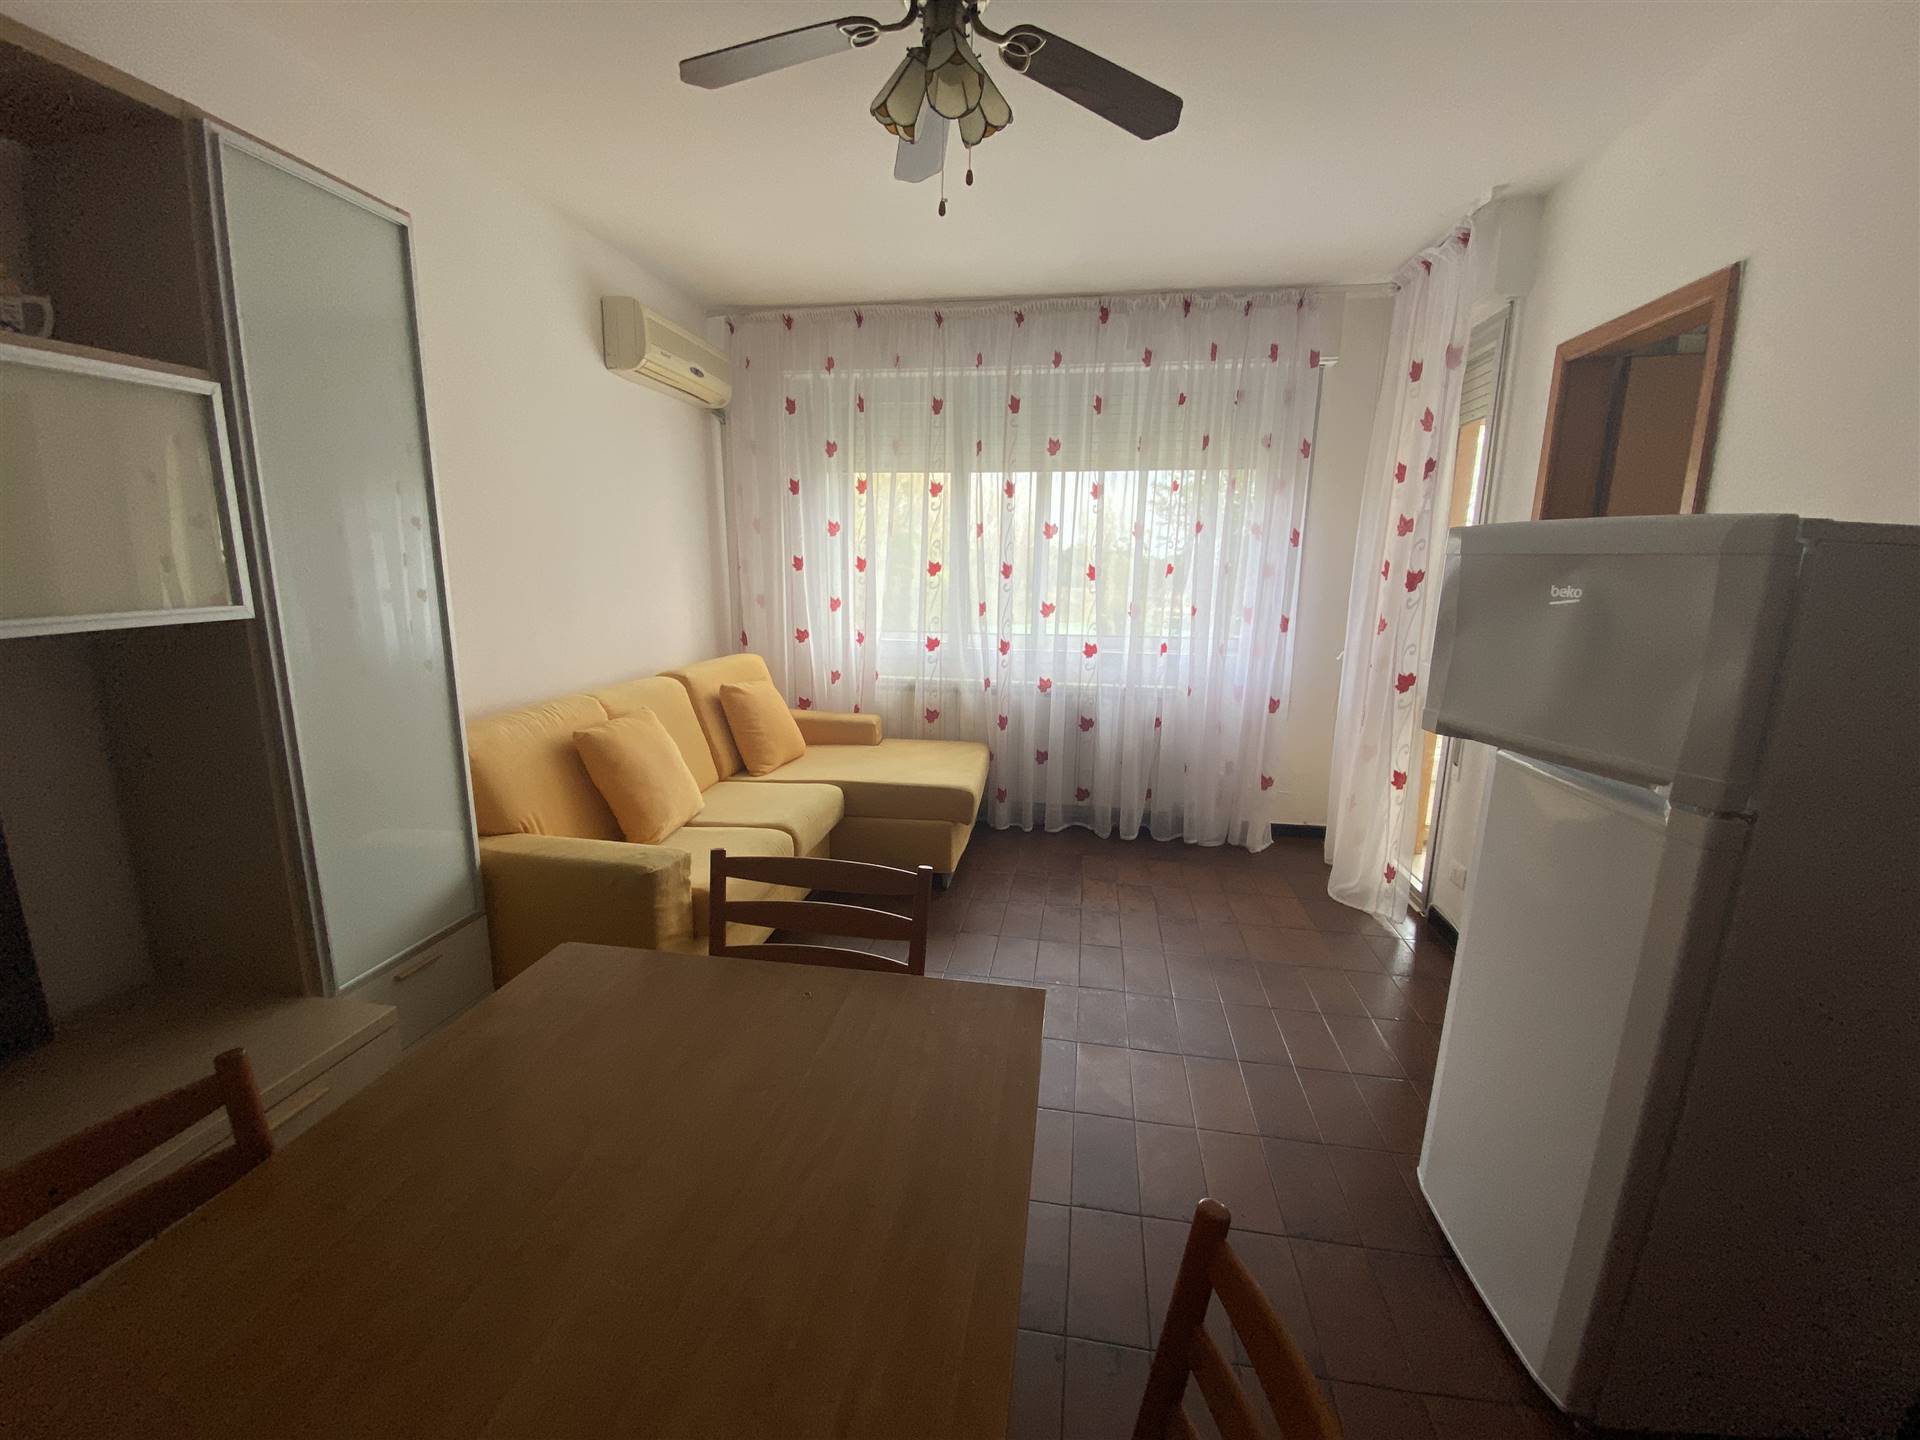 ISOLA VERDE, CHIOGGIA, Apartment for sale of 45 Sq. mt., Habitable, Heating Individual heating system, Energetic class: G, placed at 1° on 5, 